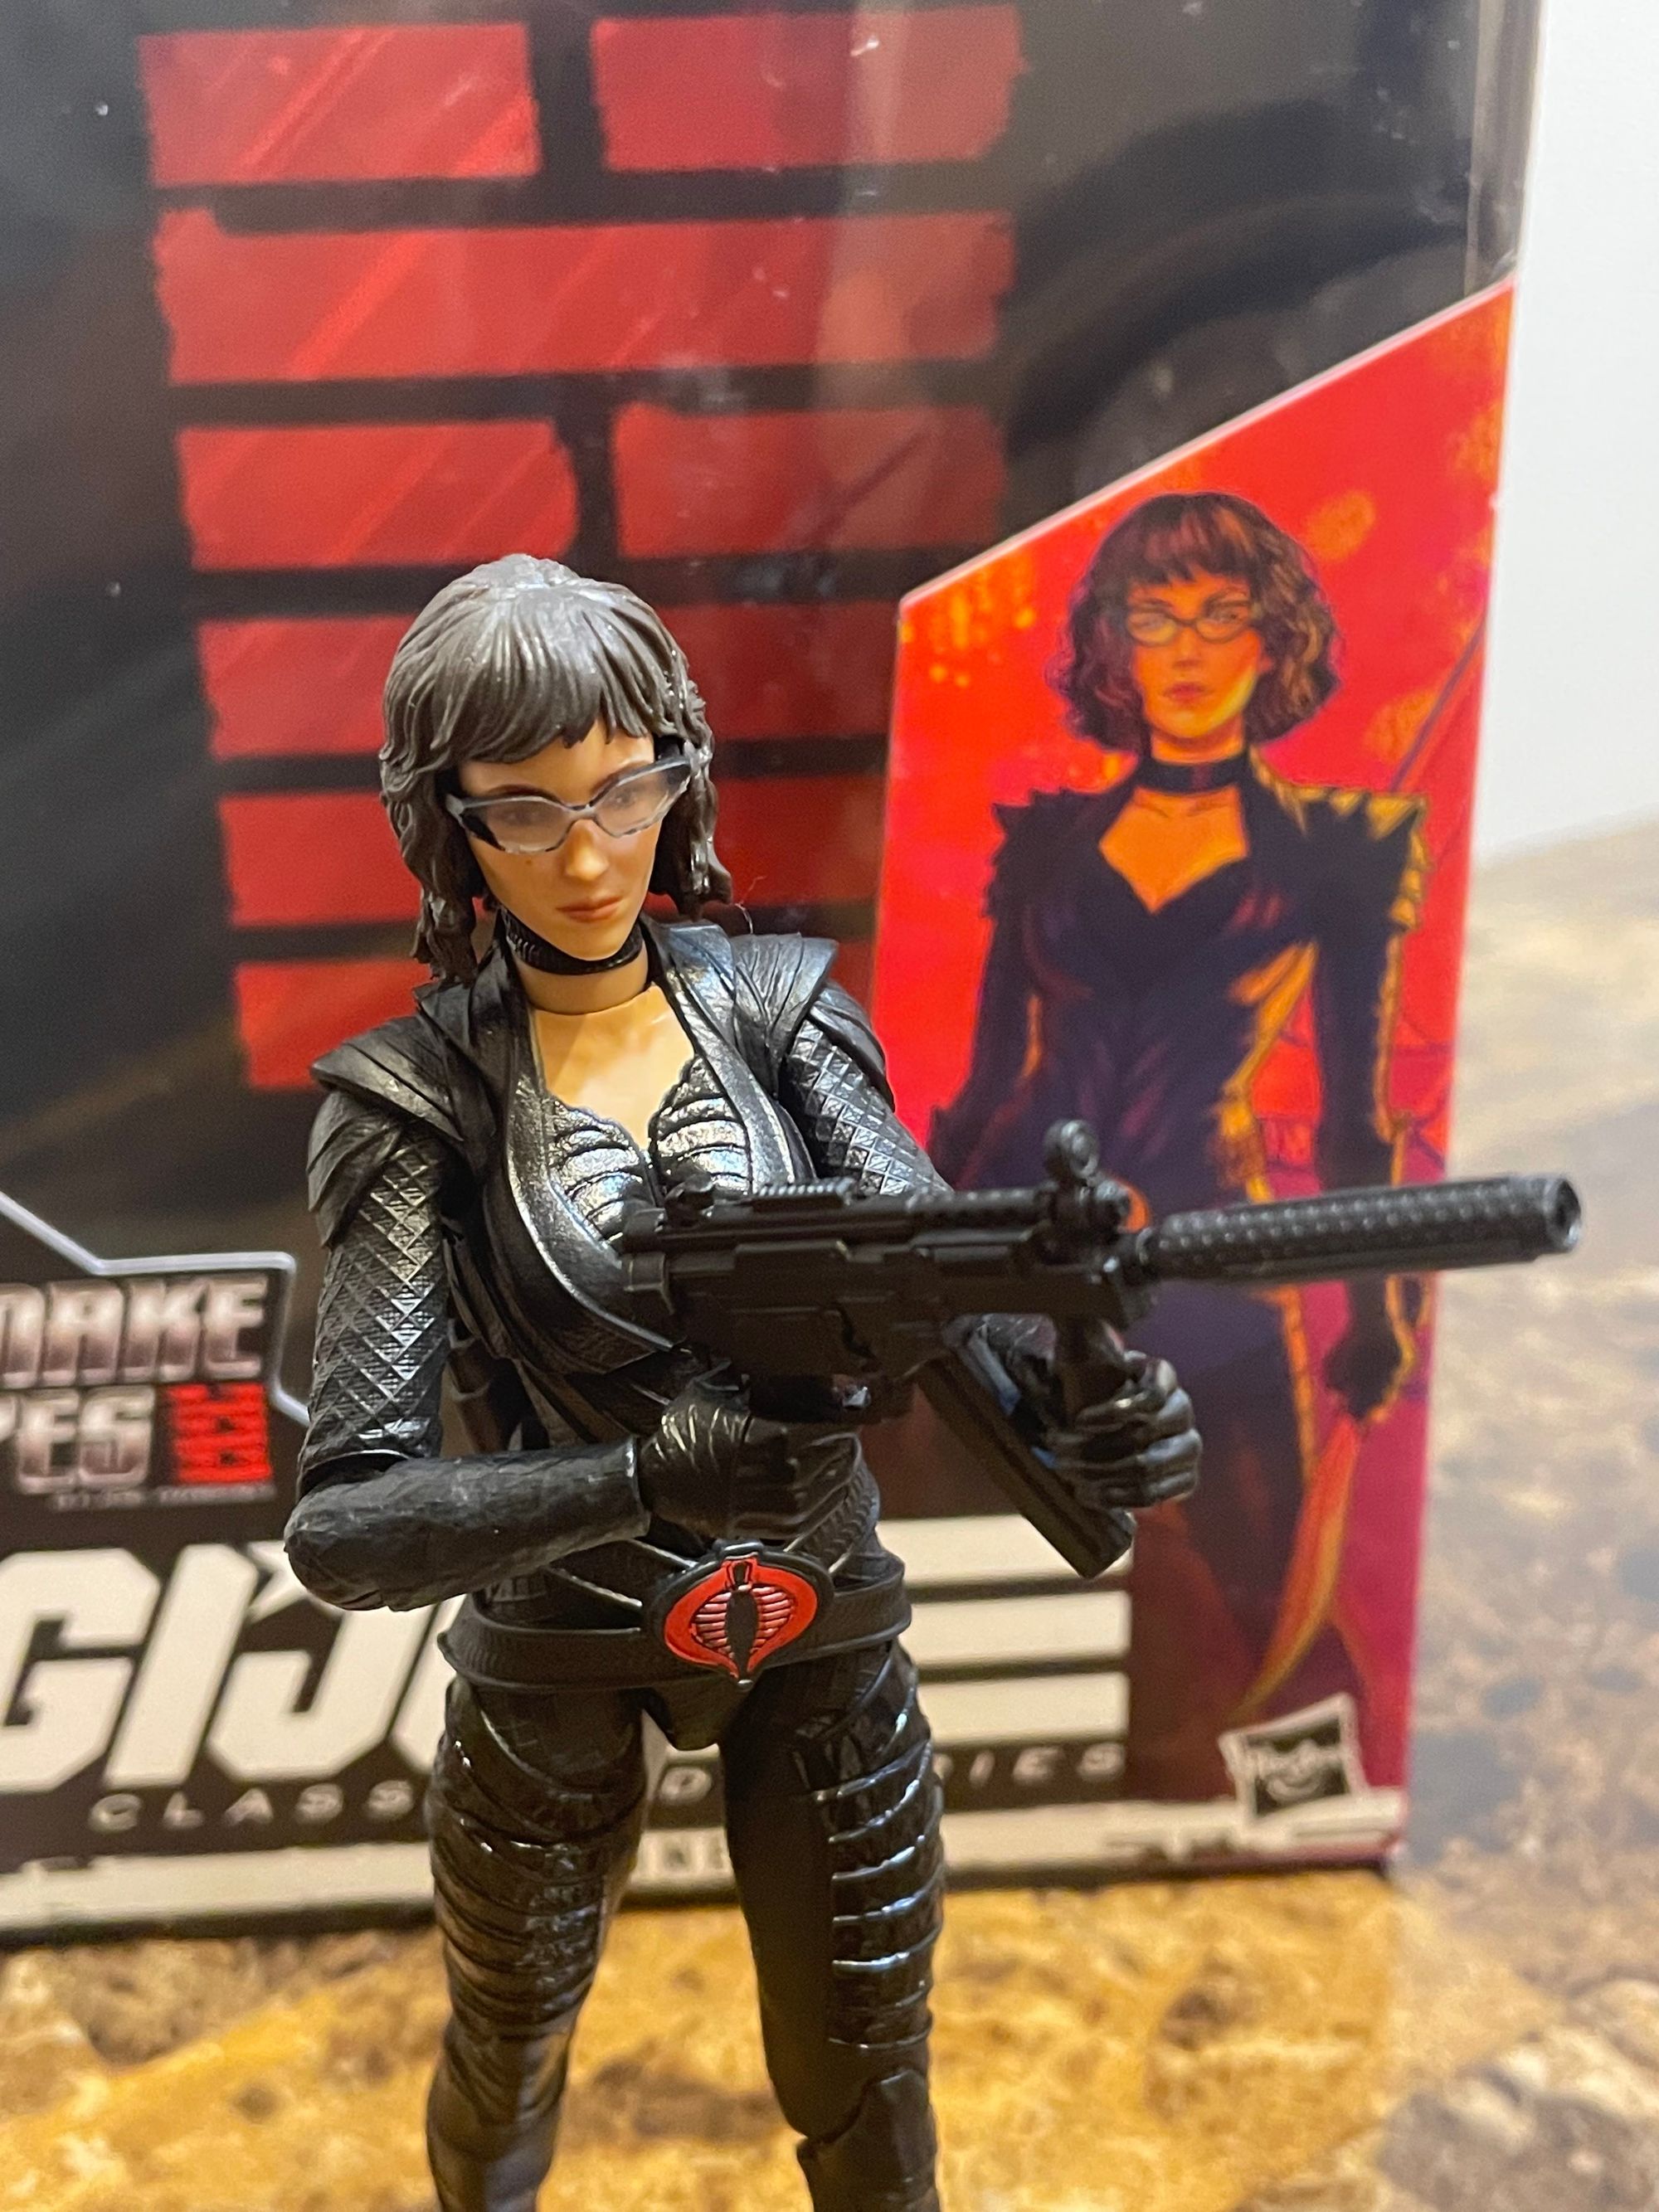 Toy of the Baroness, Cobra Intelligence head, wearing articulated black armor and wielding an MP5K with suppressor.